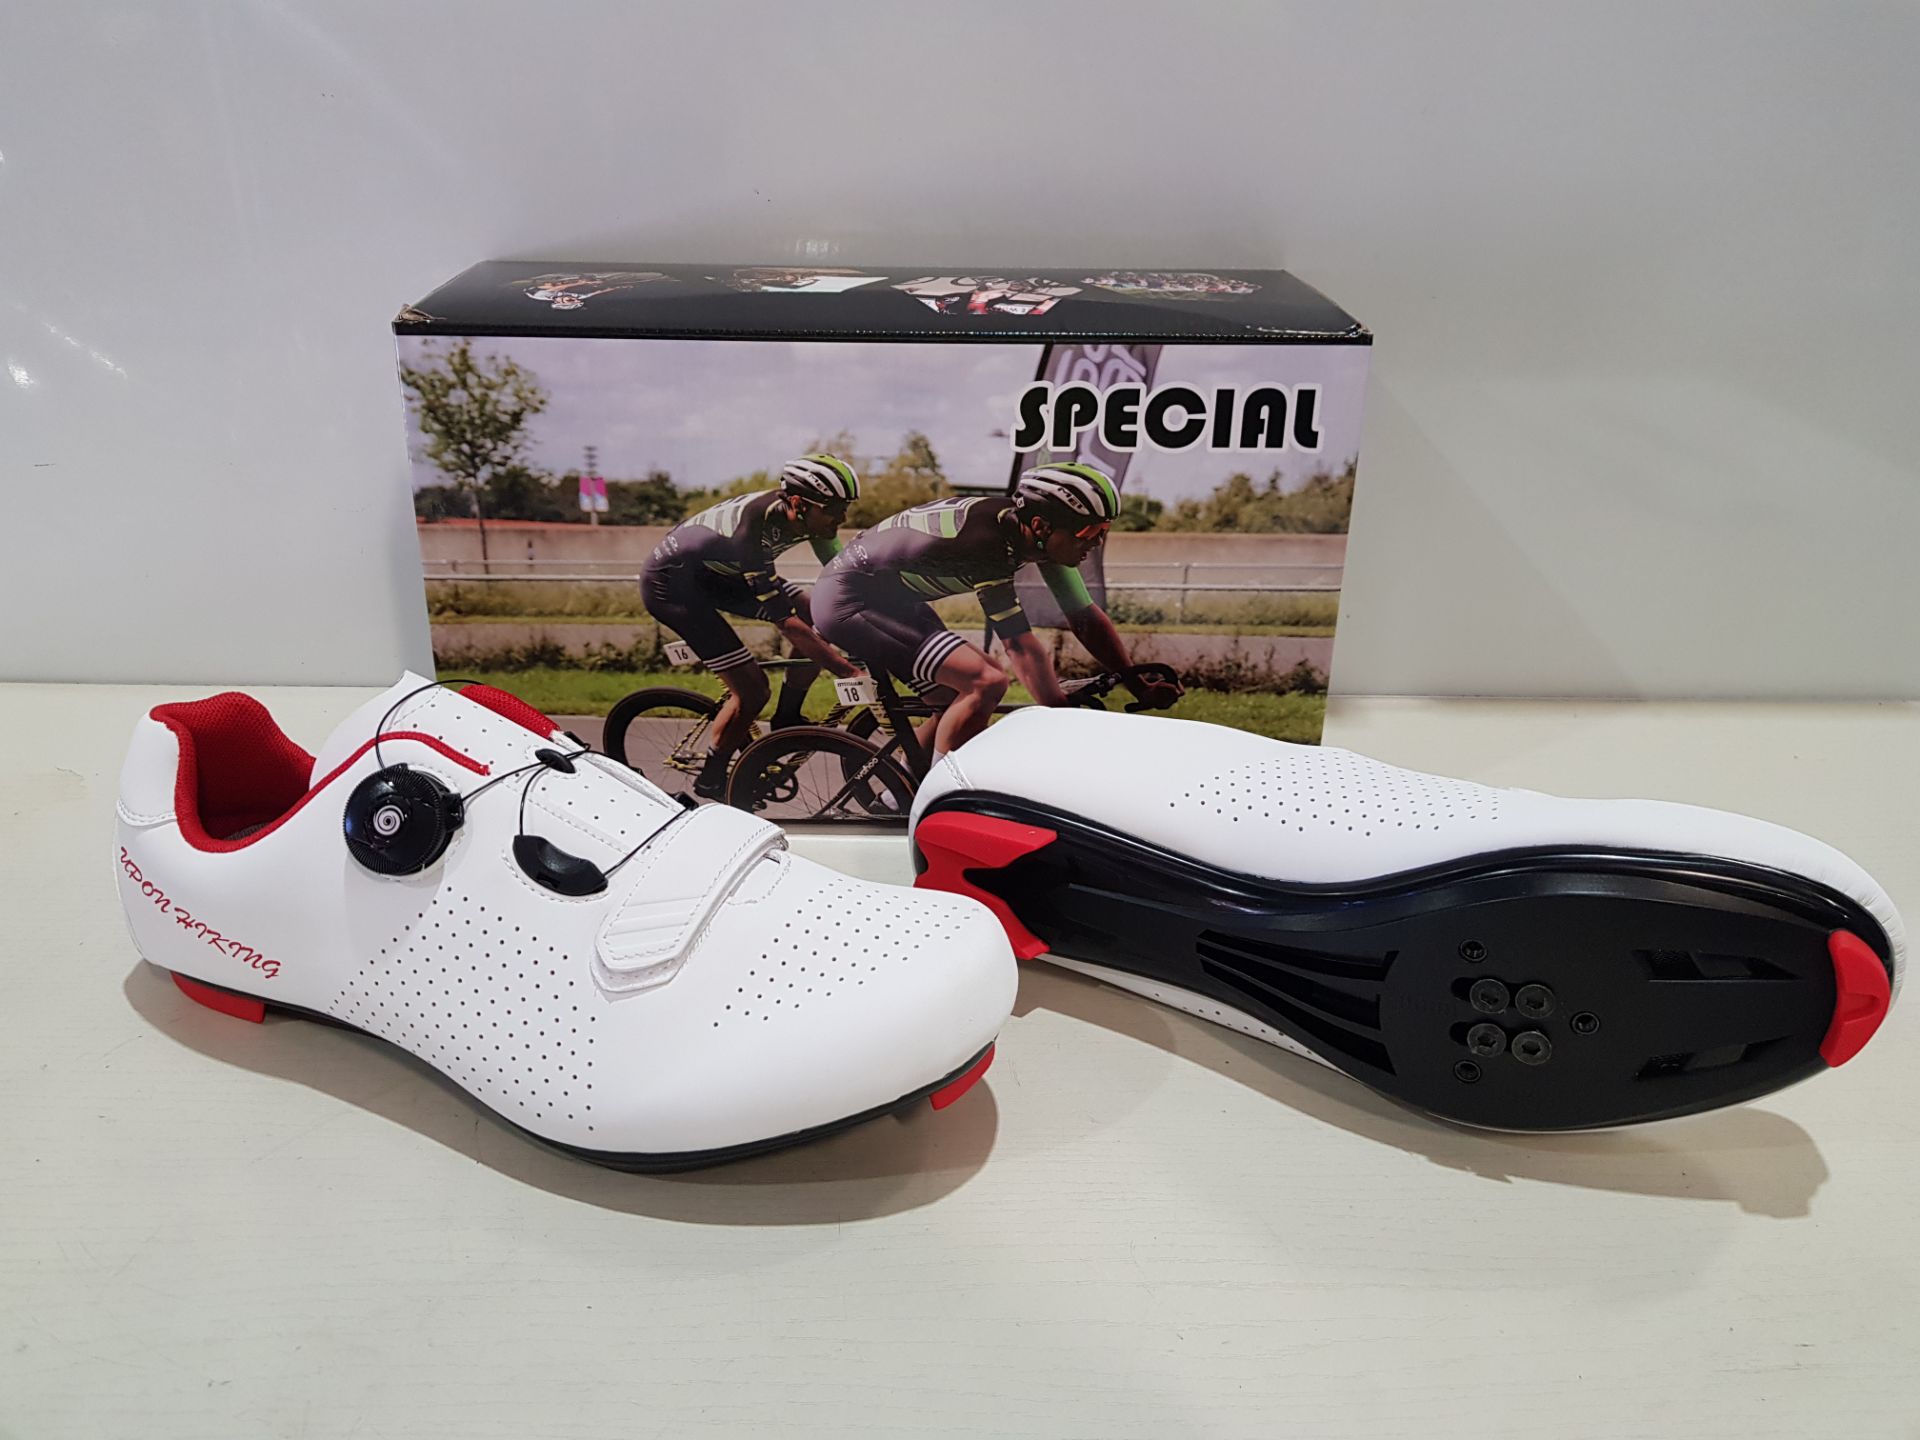 10 X BRAND NEW BOXED 'UPON HIKING' CYCLING SHOES IN WHITE - SIZE 9.5